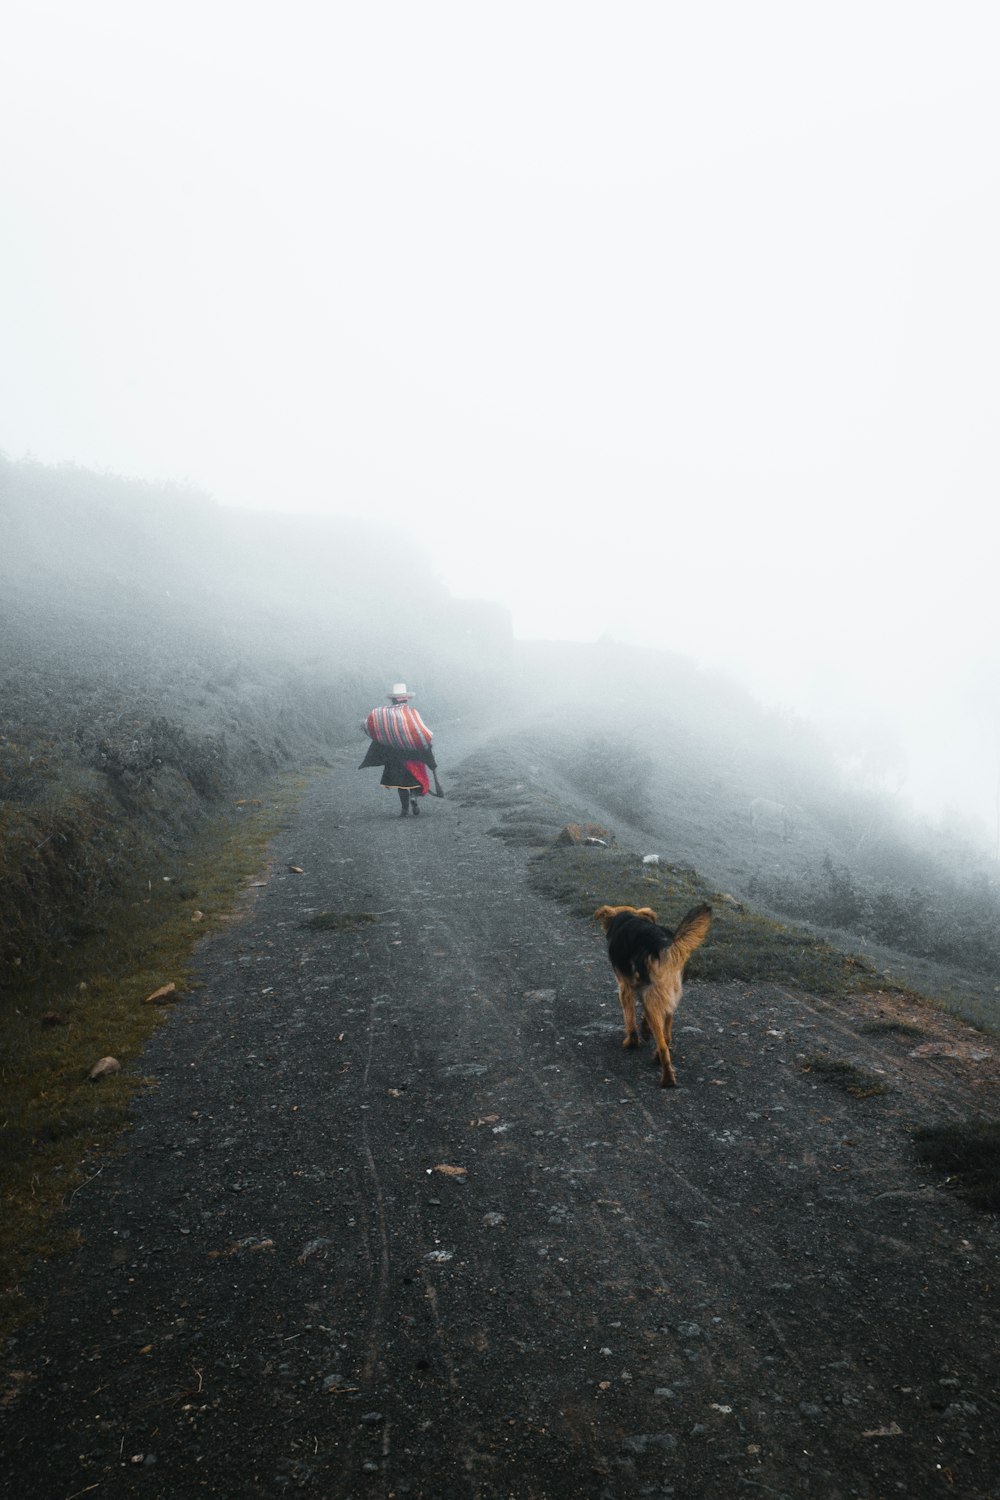 person on hill with fogs